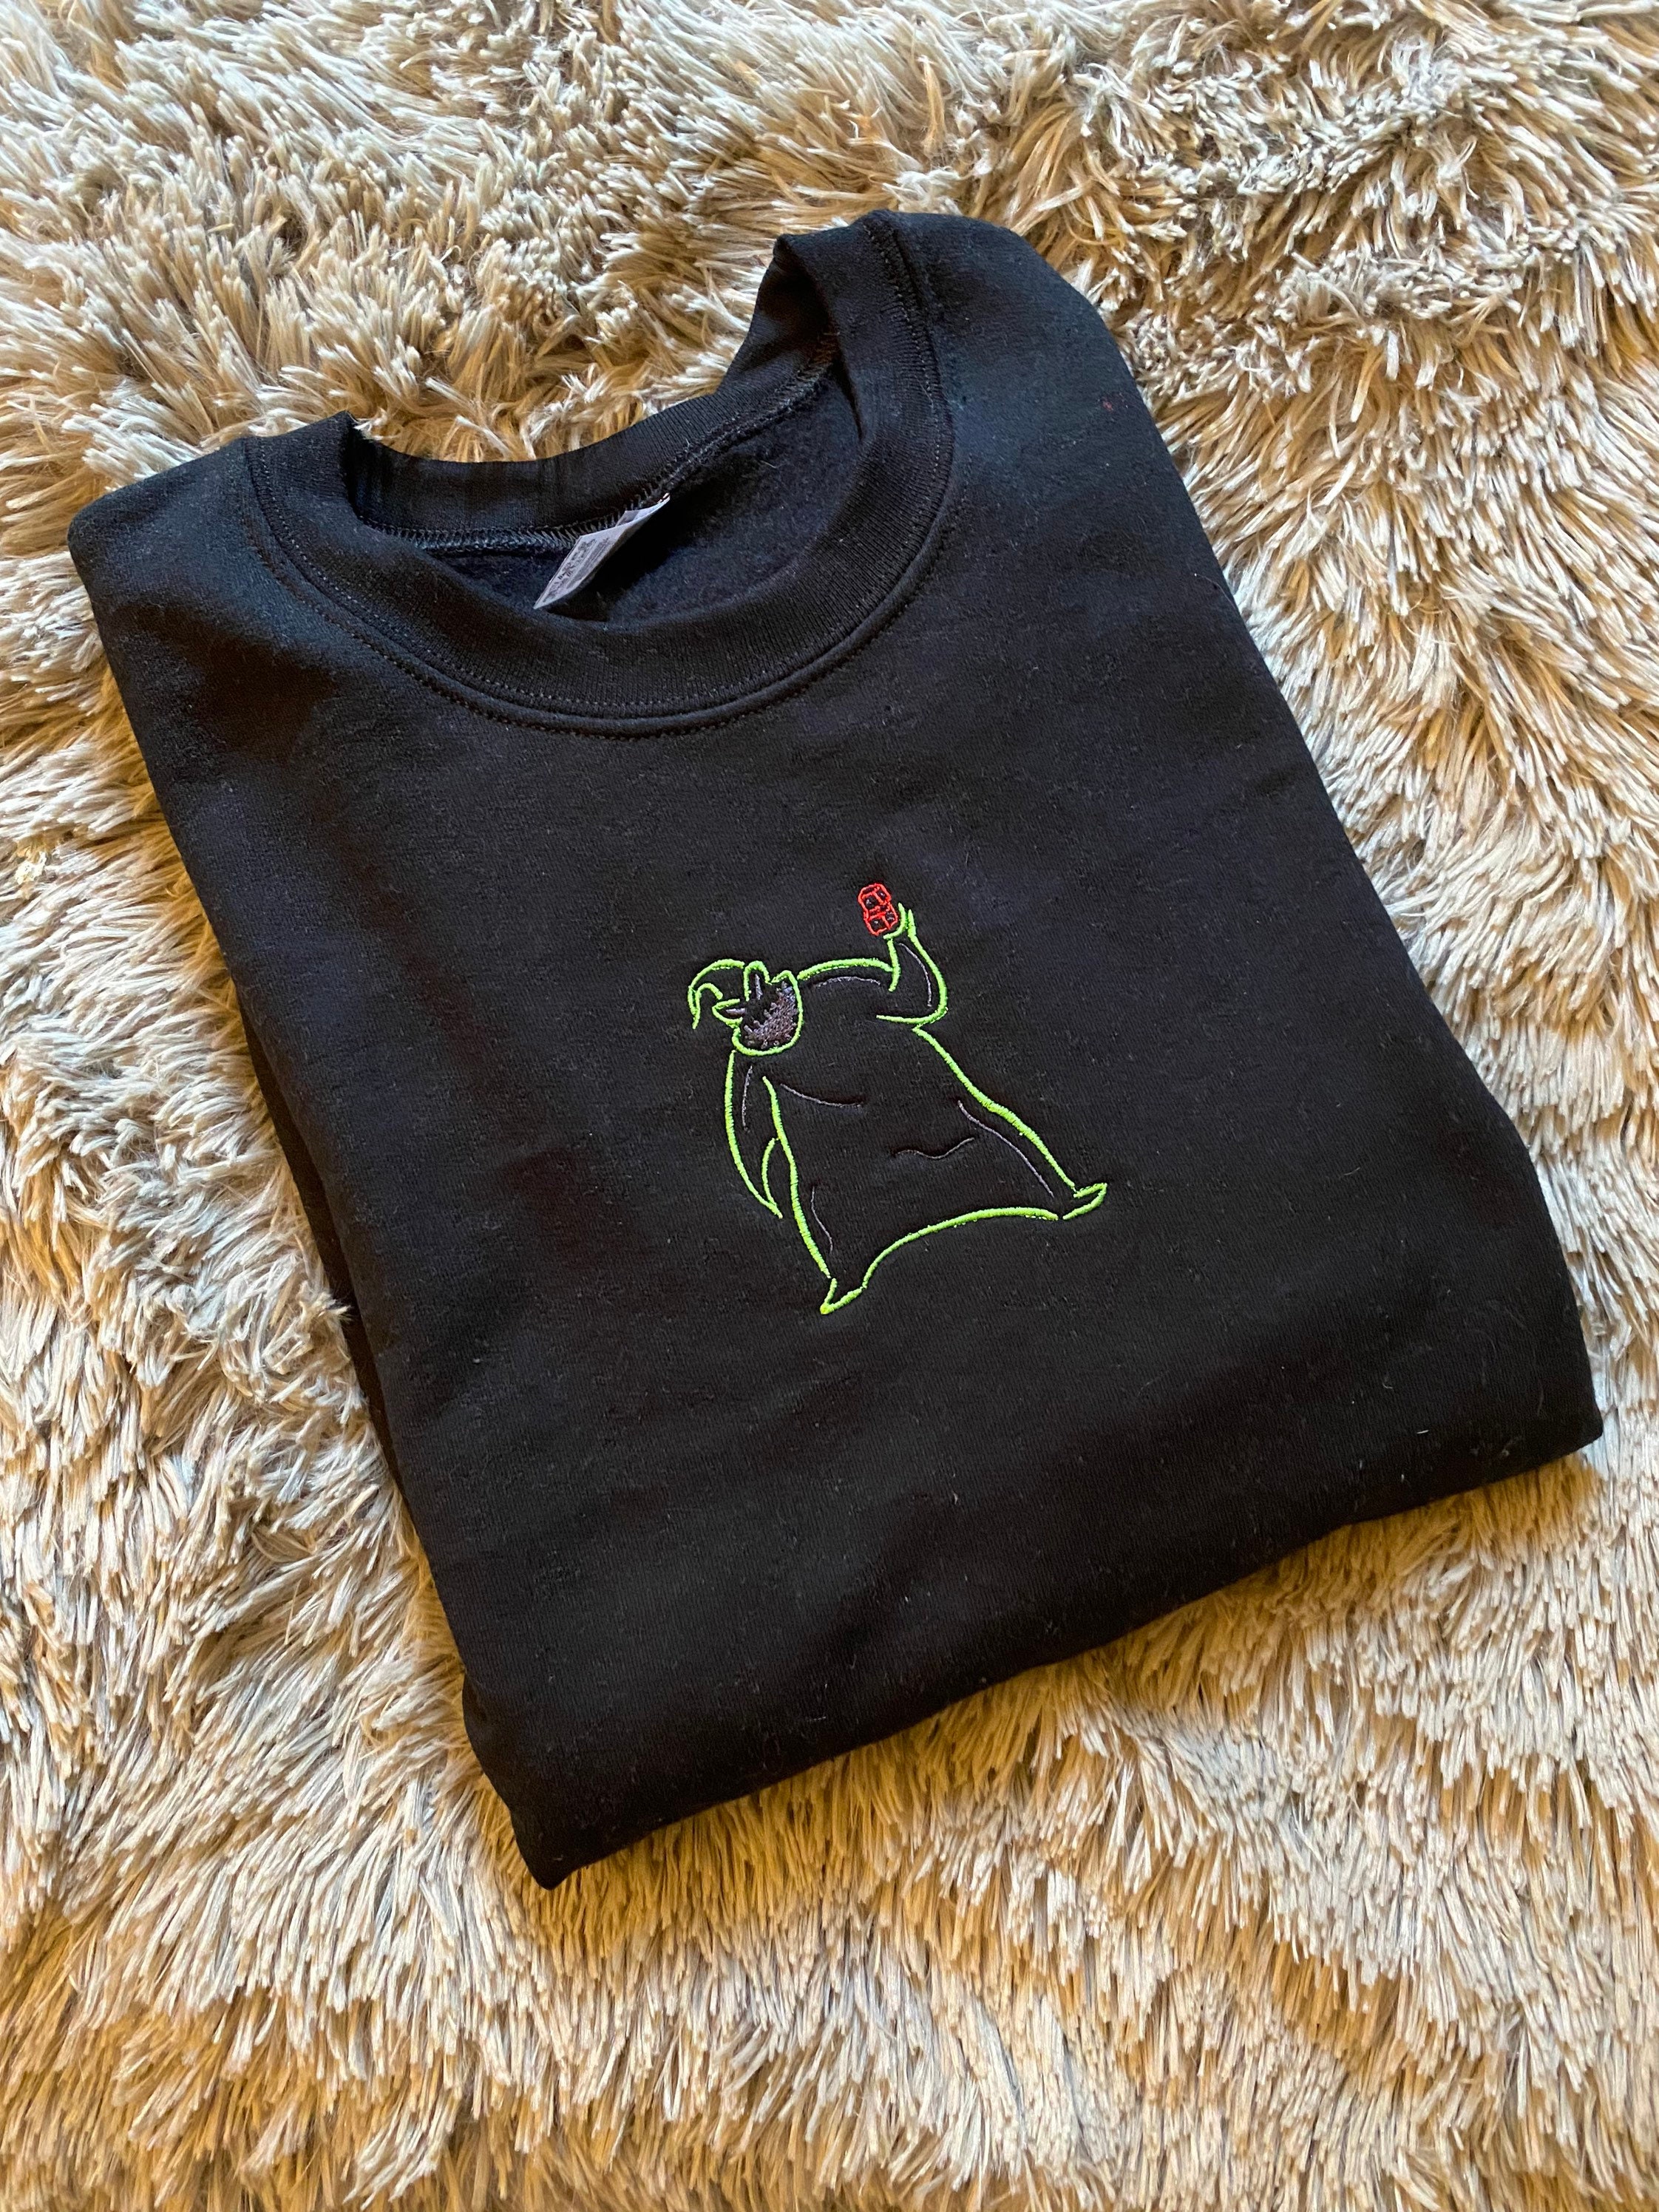 Oogie boogie embroidered sweatshirt, embroidered